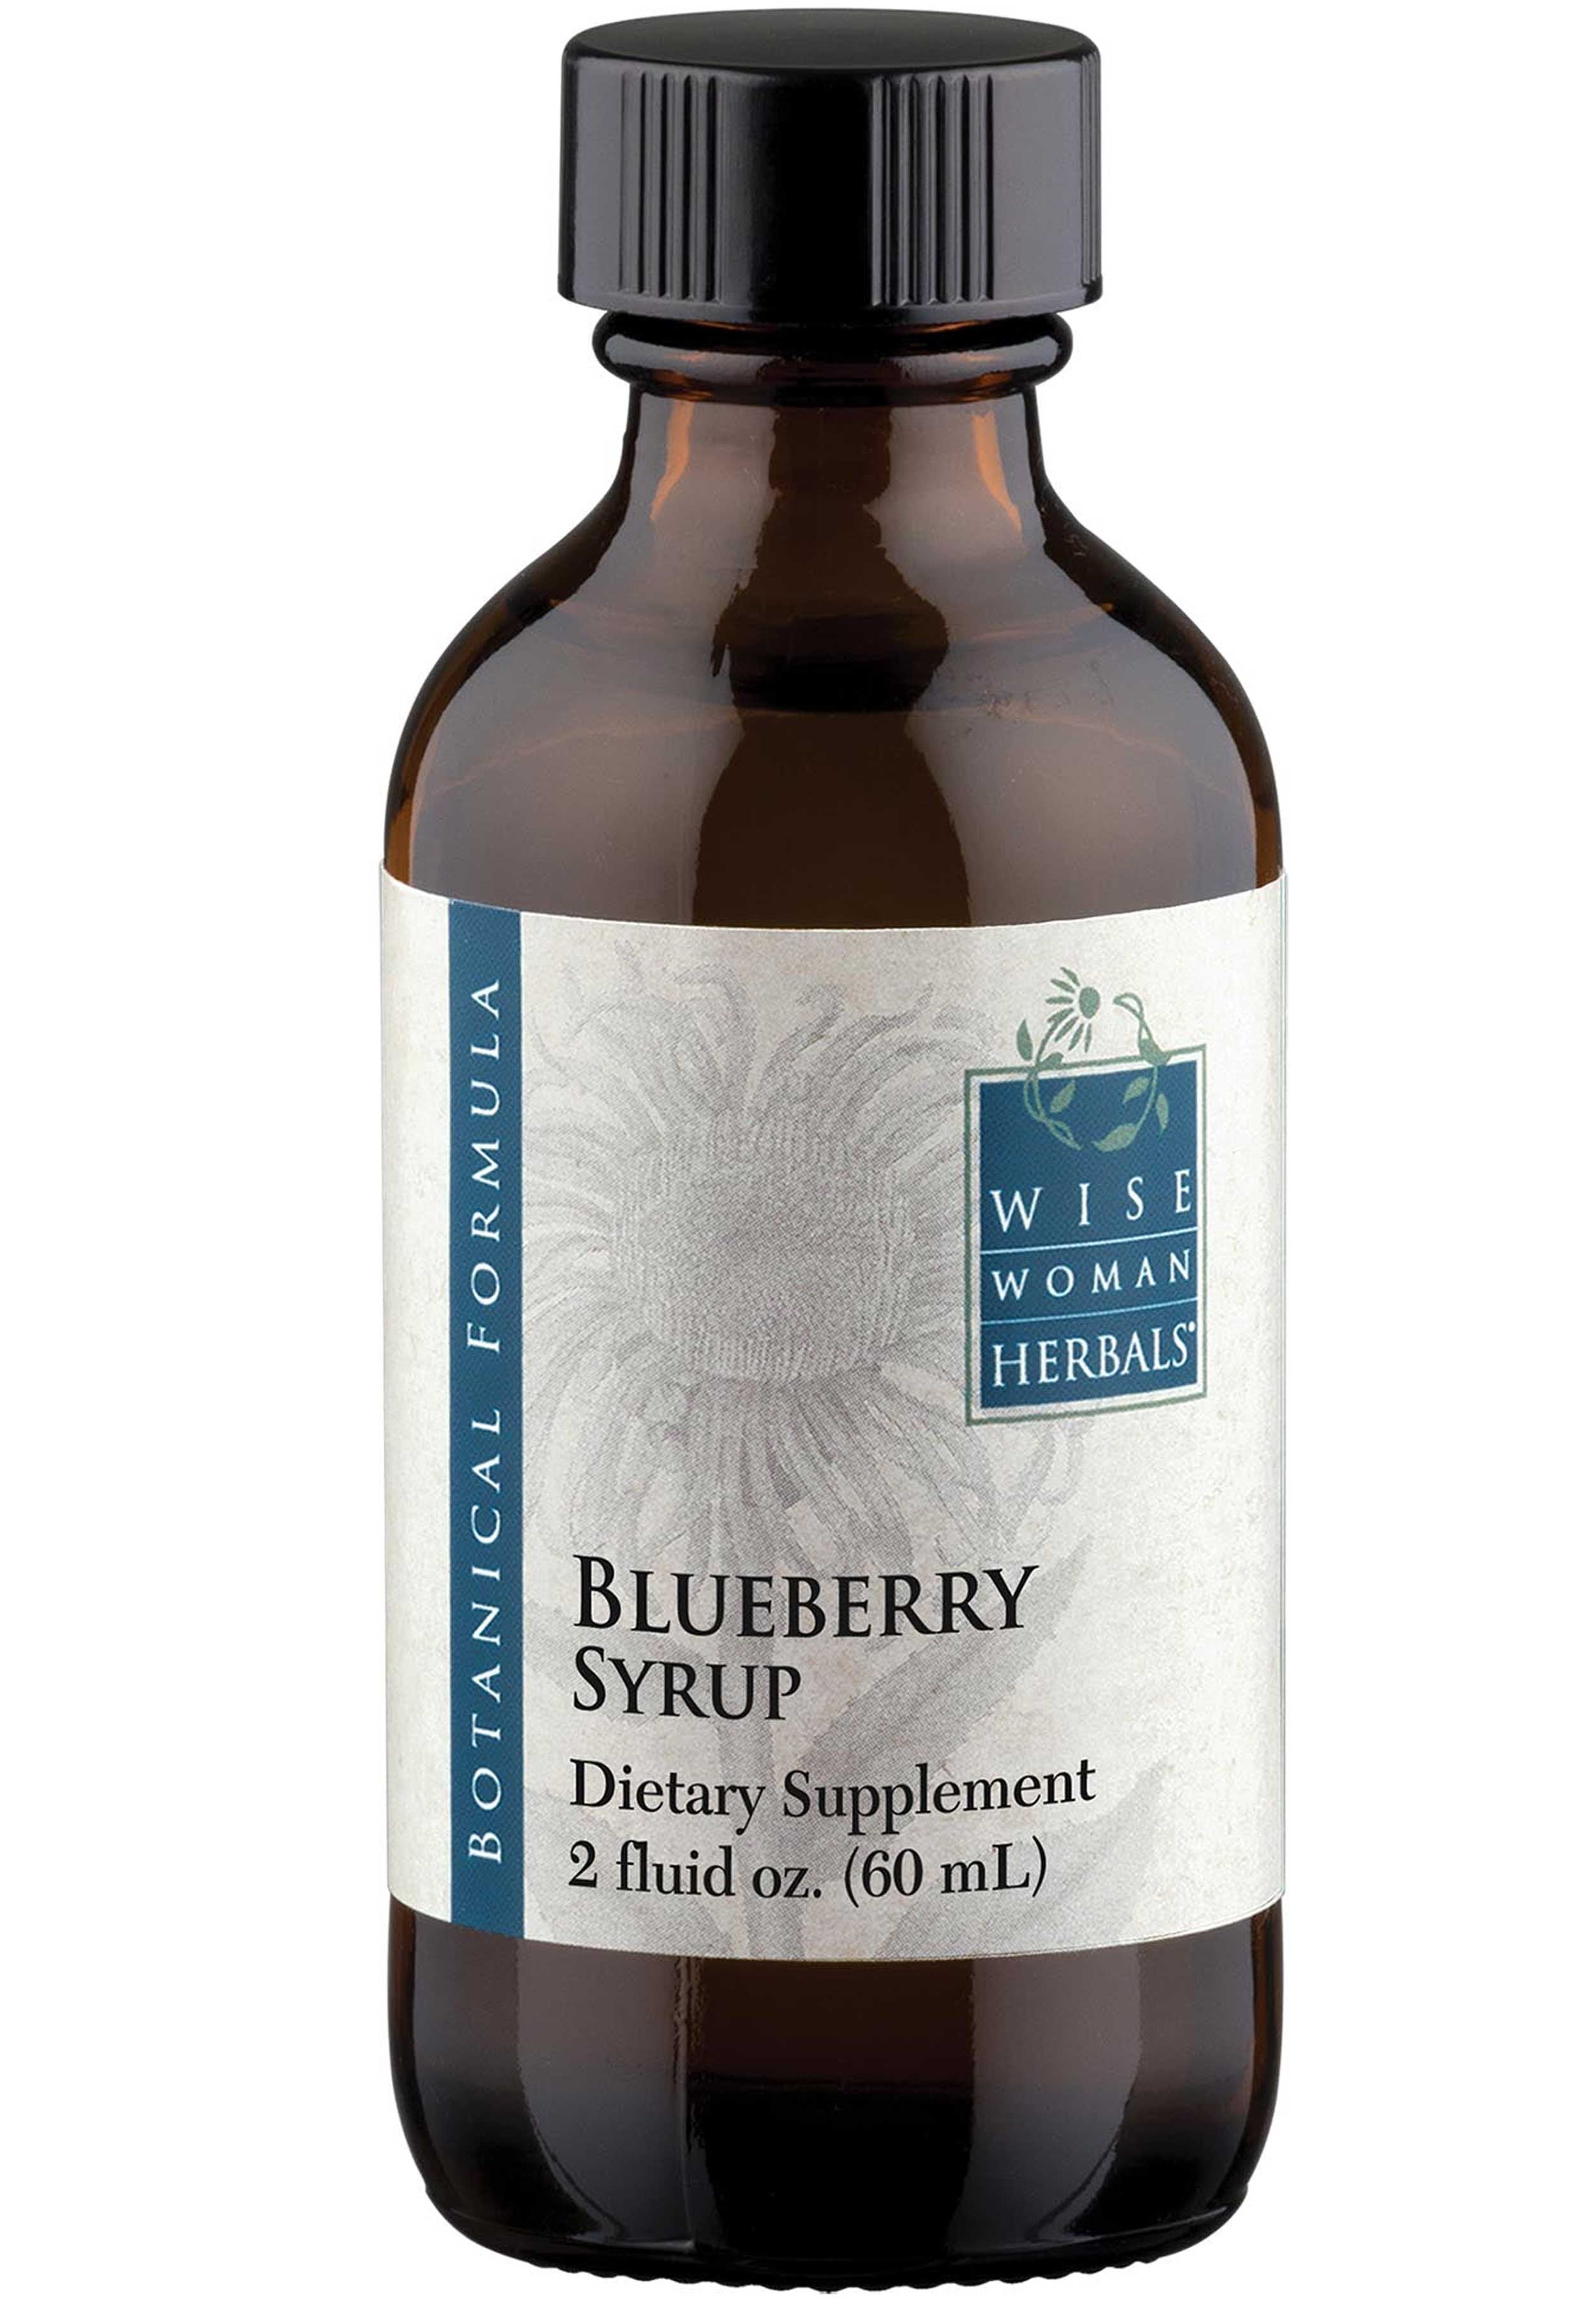 Wise Woman Herbals Blueberry Syrup